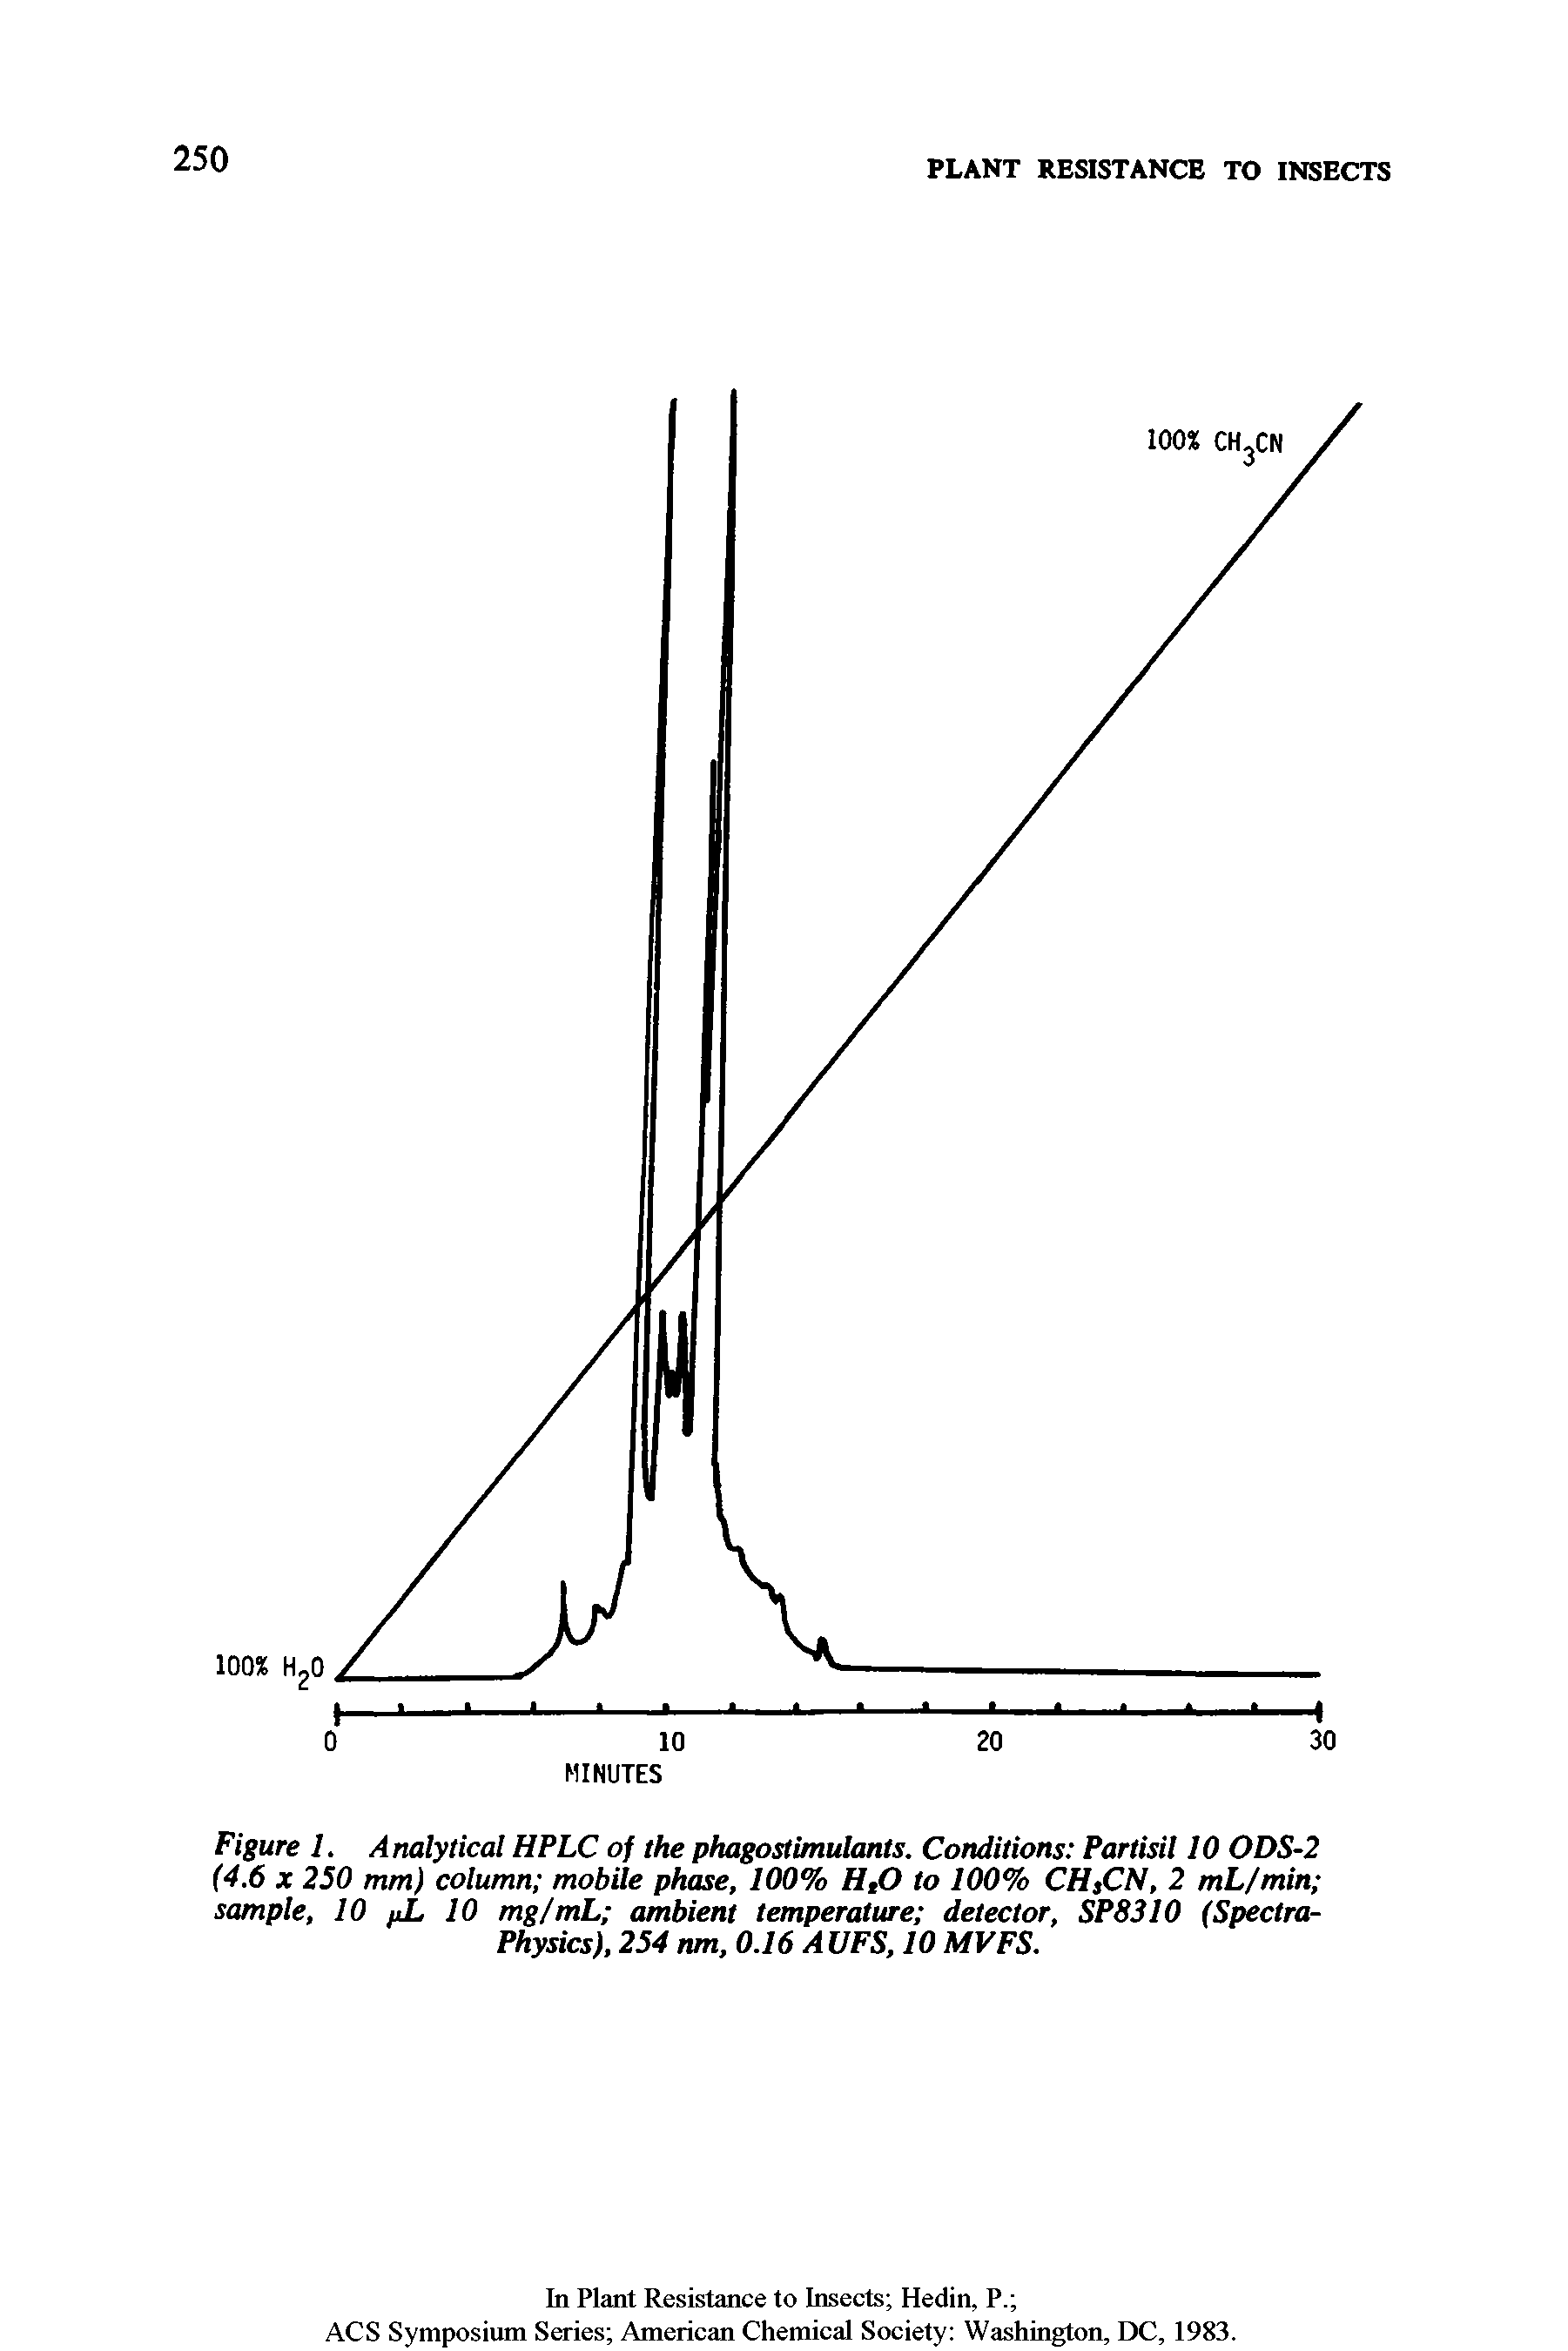 Figure 1. Analytical HPLC of the phagostimulants. Conditions Partisil 10 ODS-2 (4.6 X 250 mm) column mobile phase, 100% HJO to 100% CHtCN, 2 mL/min sample, 10 /iL 10 mg/mL ambient temperature detector, SP8310 (Spectra-Physics), 254 nm, 0.16 AUFS, 10 MVFS.